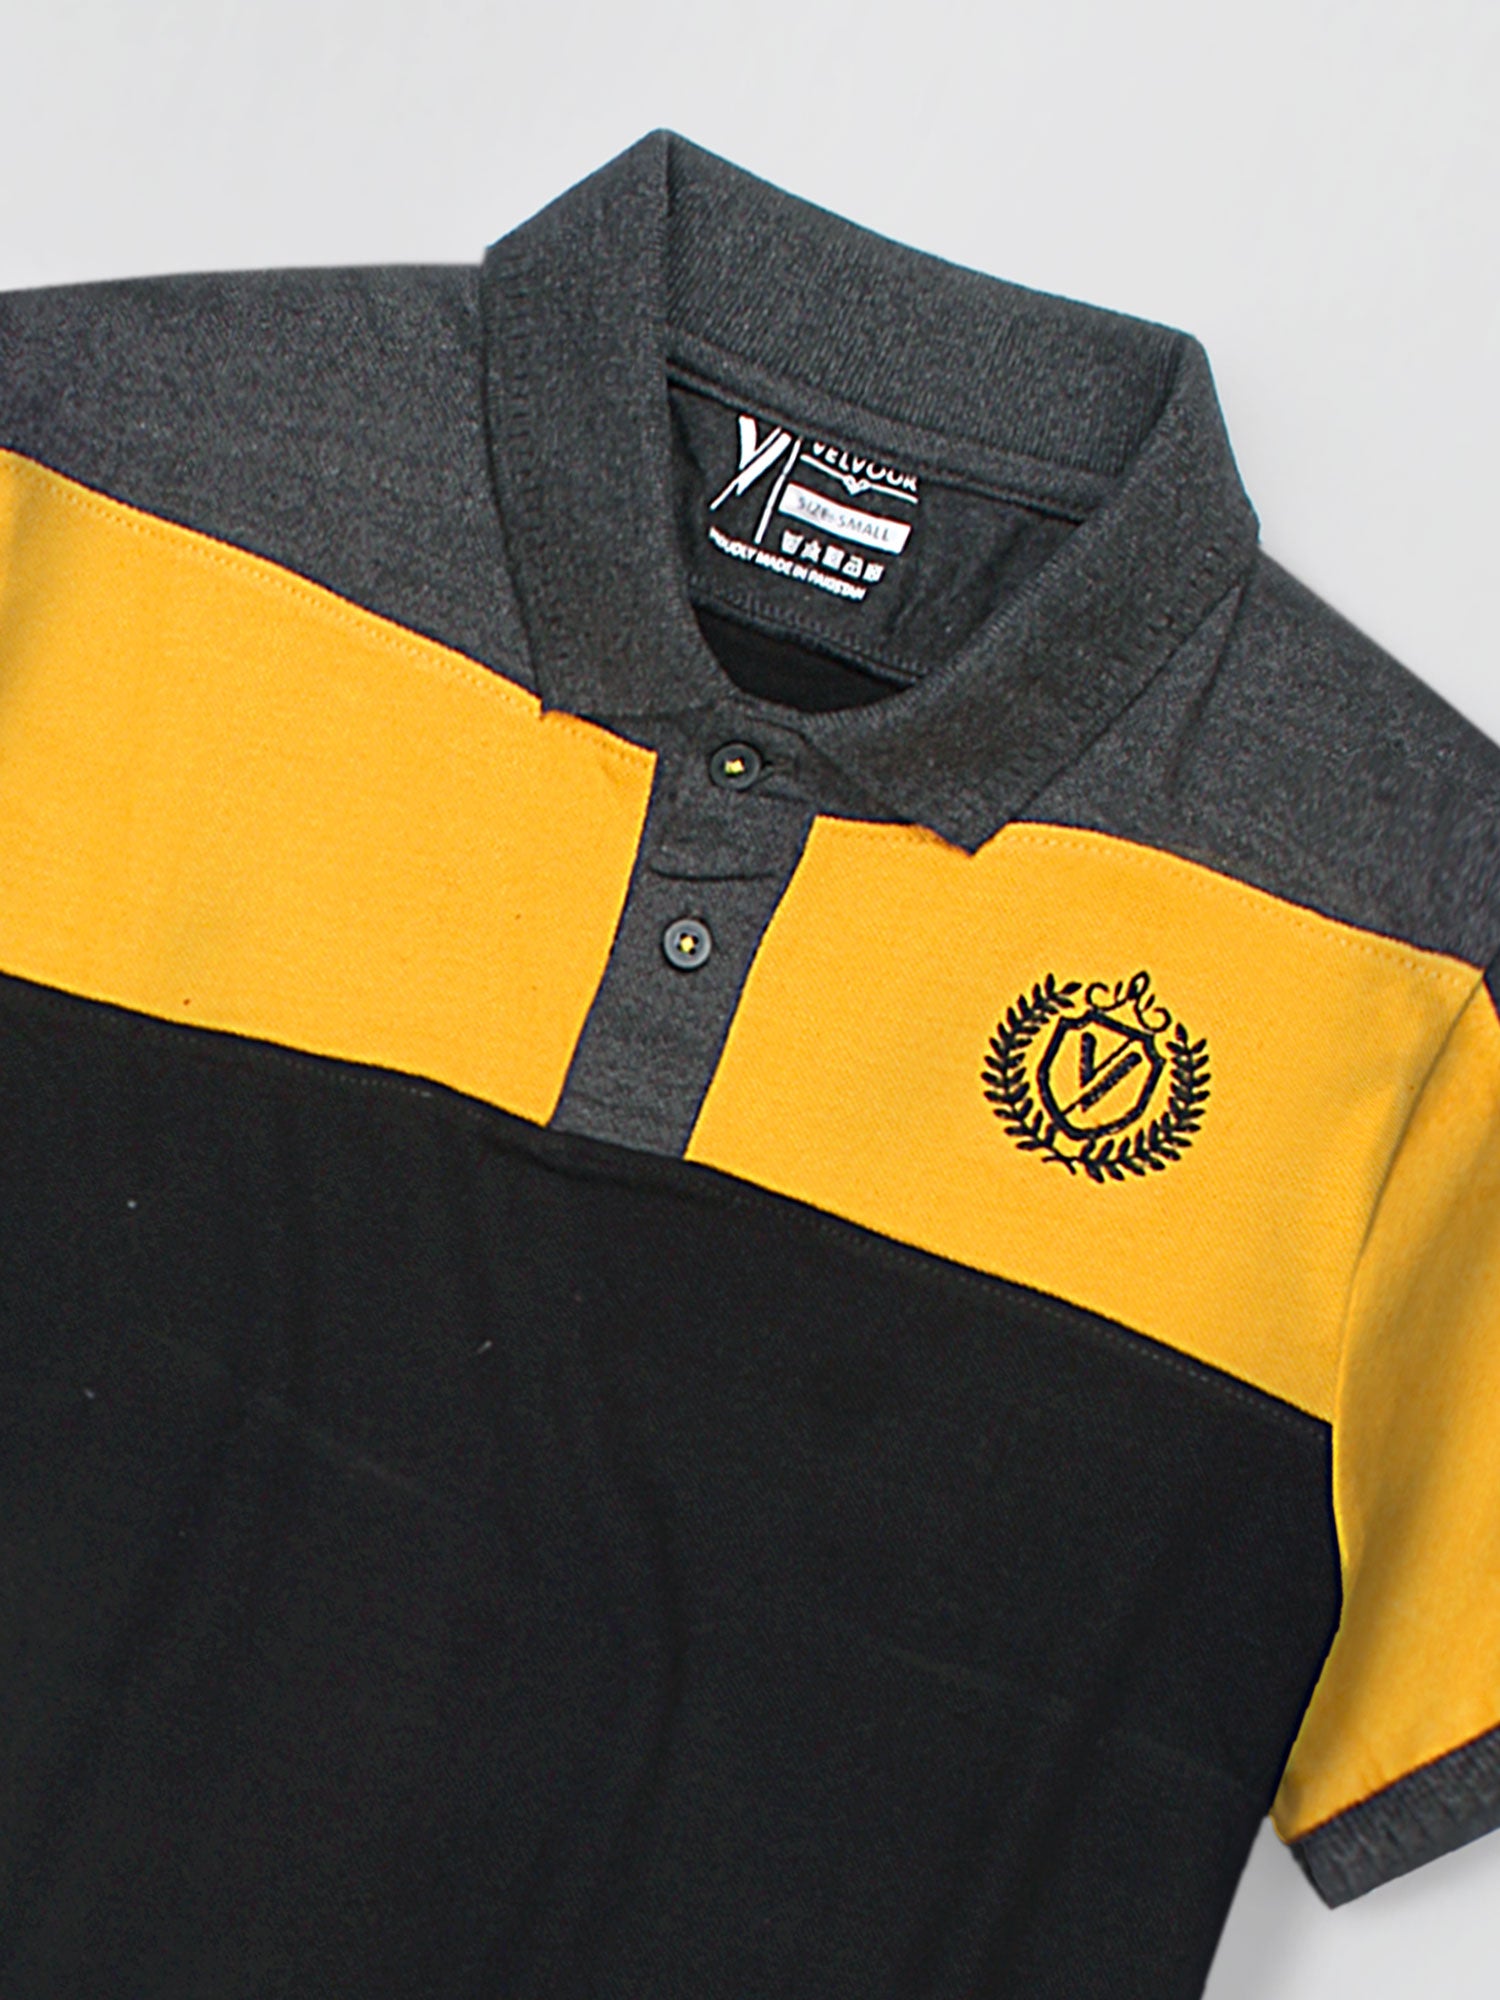 Mens Polo Shirt (Short Sleeve) By Velvour Art #VMP04-A/CY - Velvour Shop